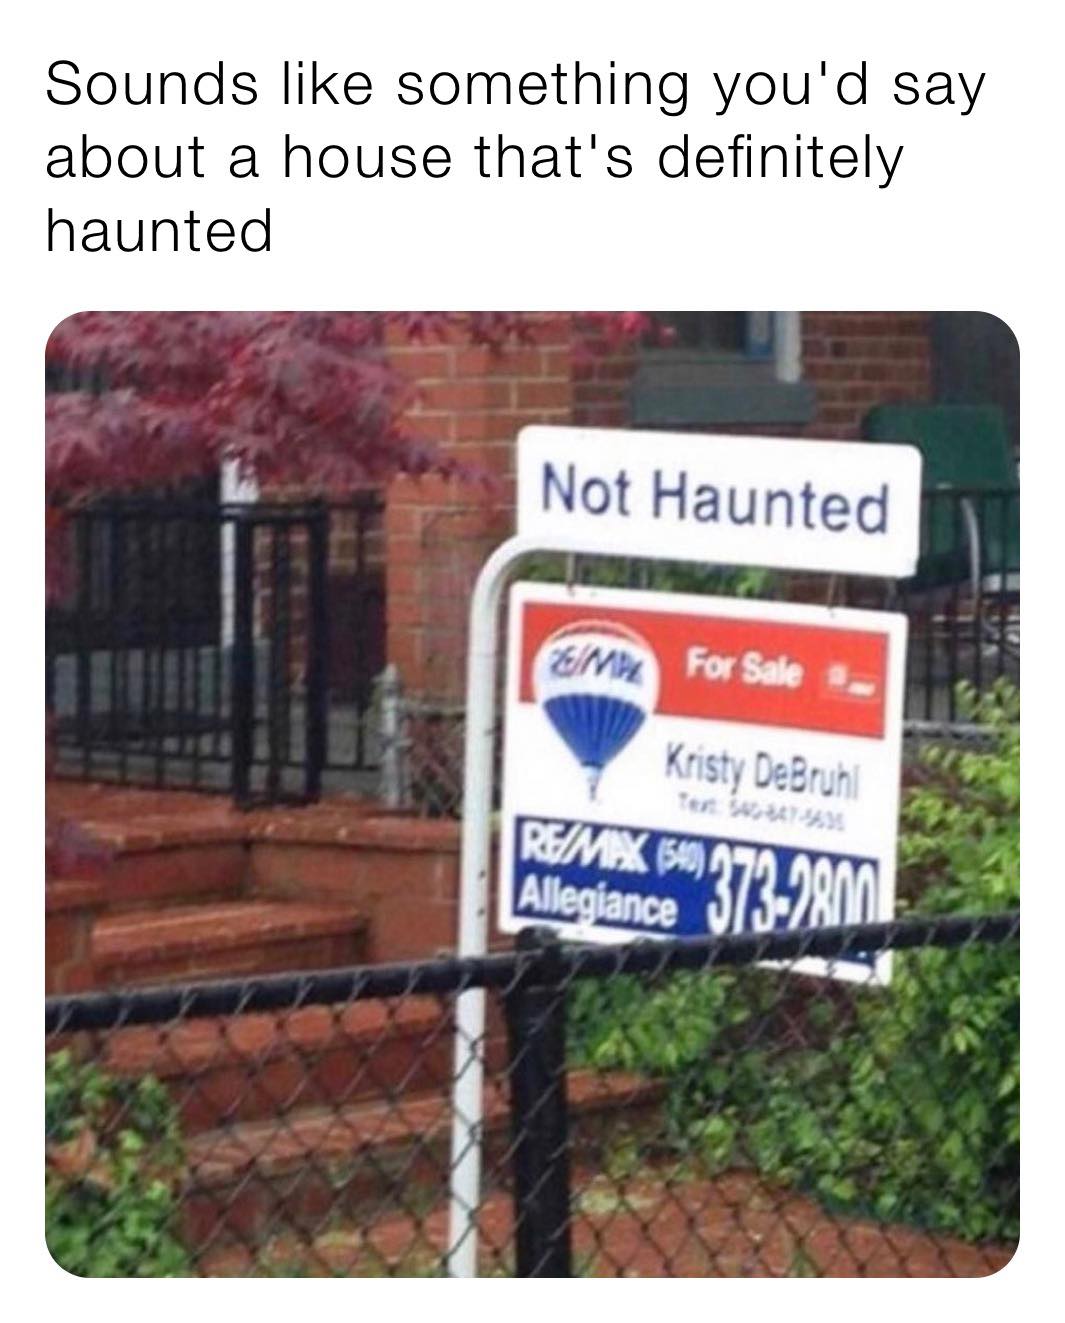 not haunted meme - Sounds something you'd say about a house that's definitely haunted Not Haunted En For Sale Kristy DeBruhi Rmx 5997 Allegiance 3739801